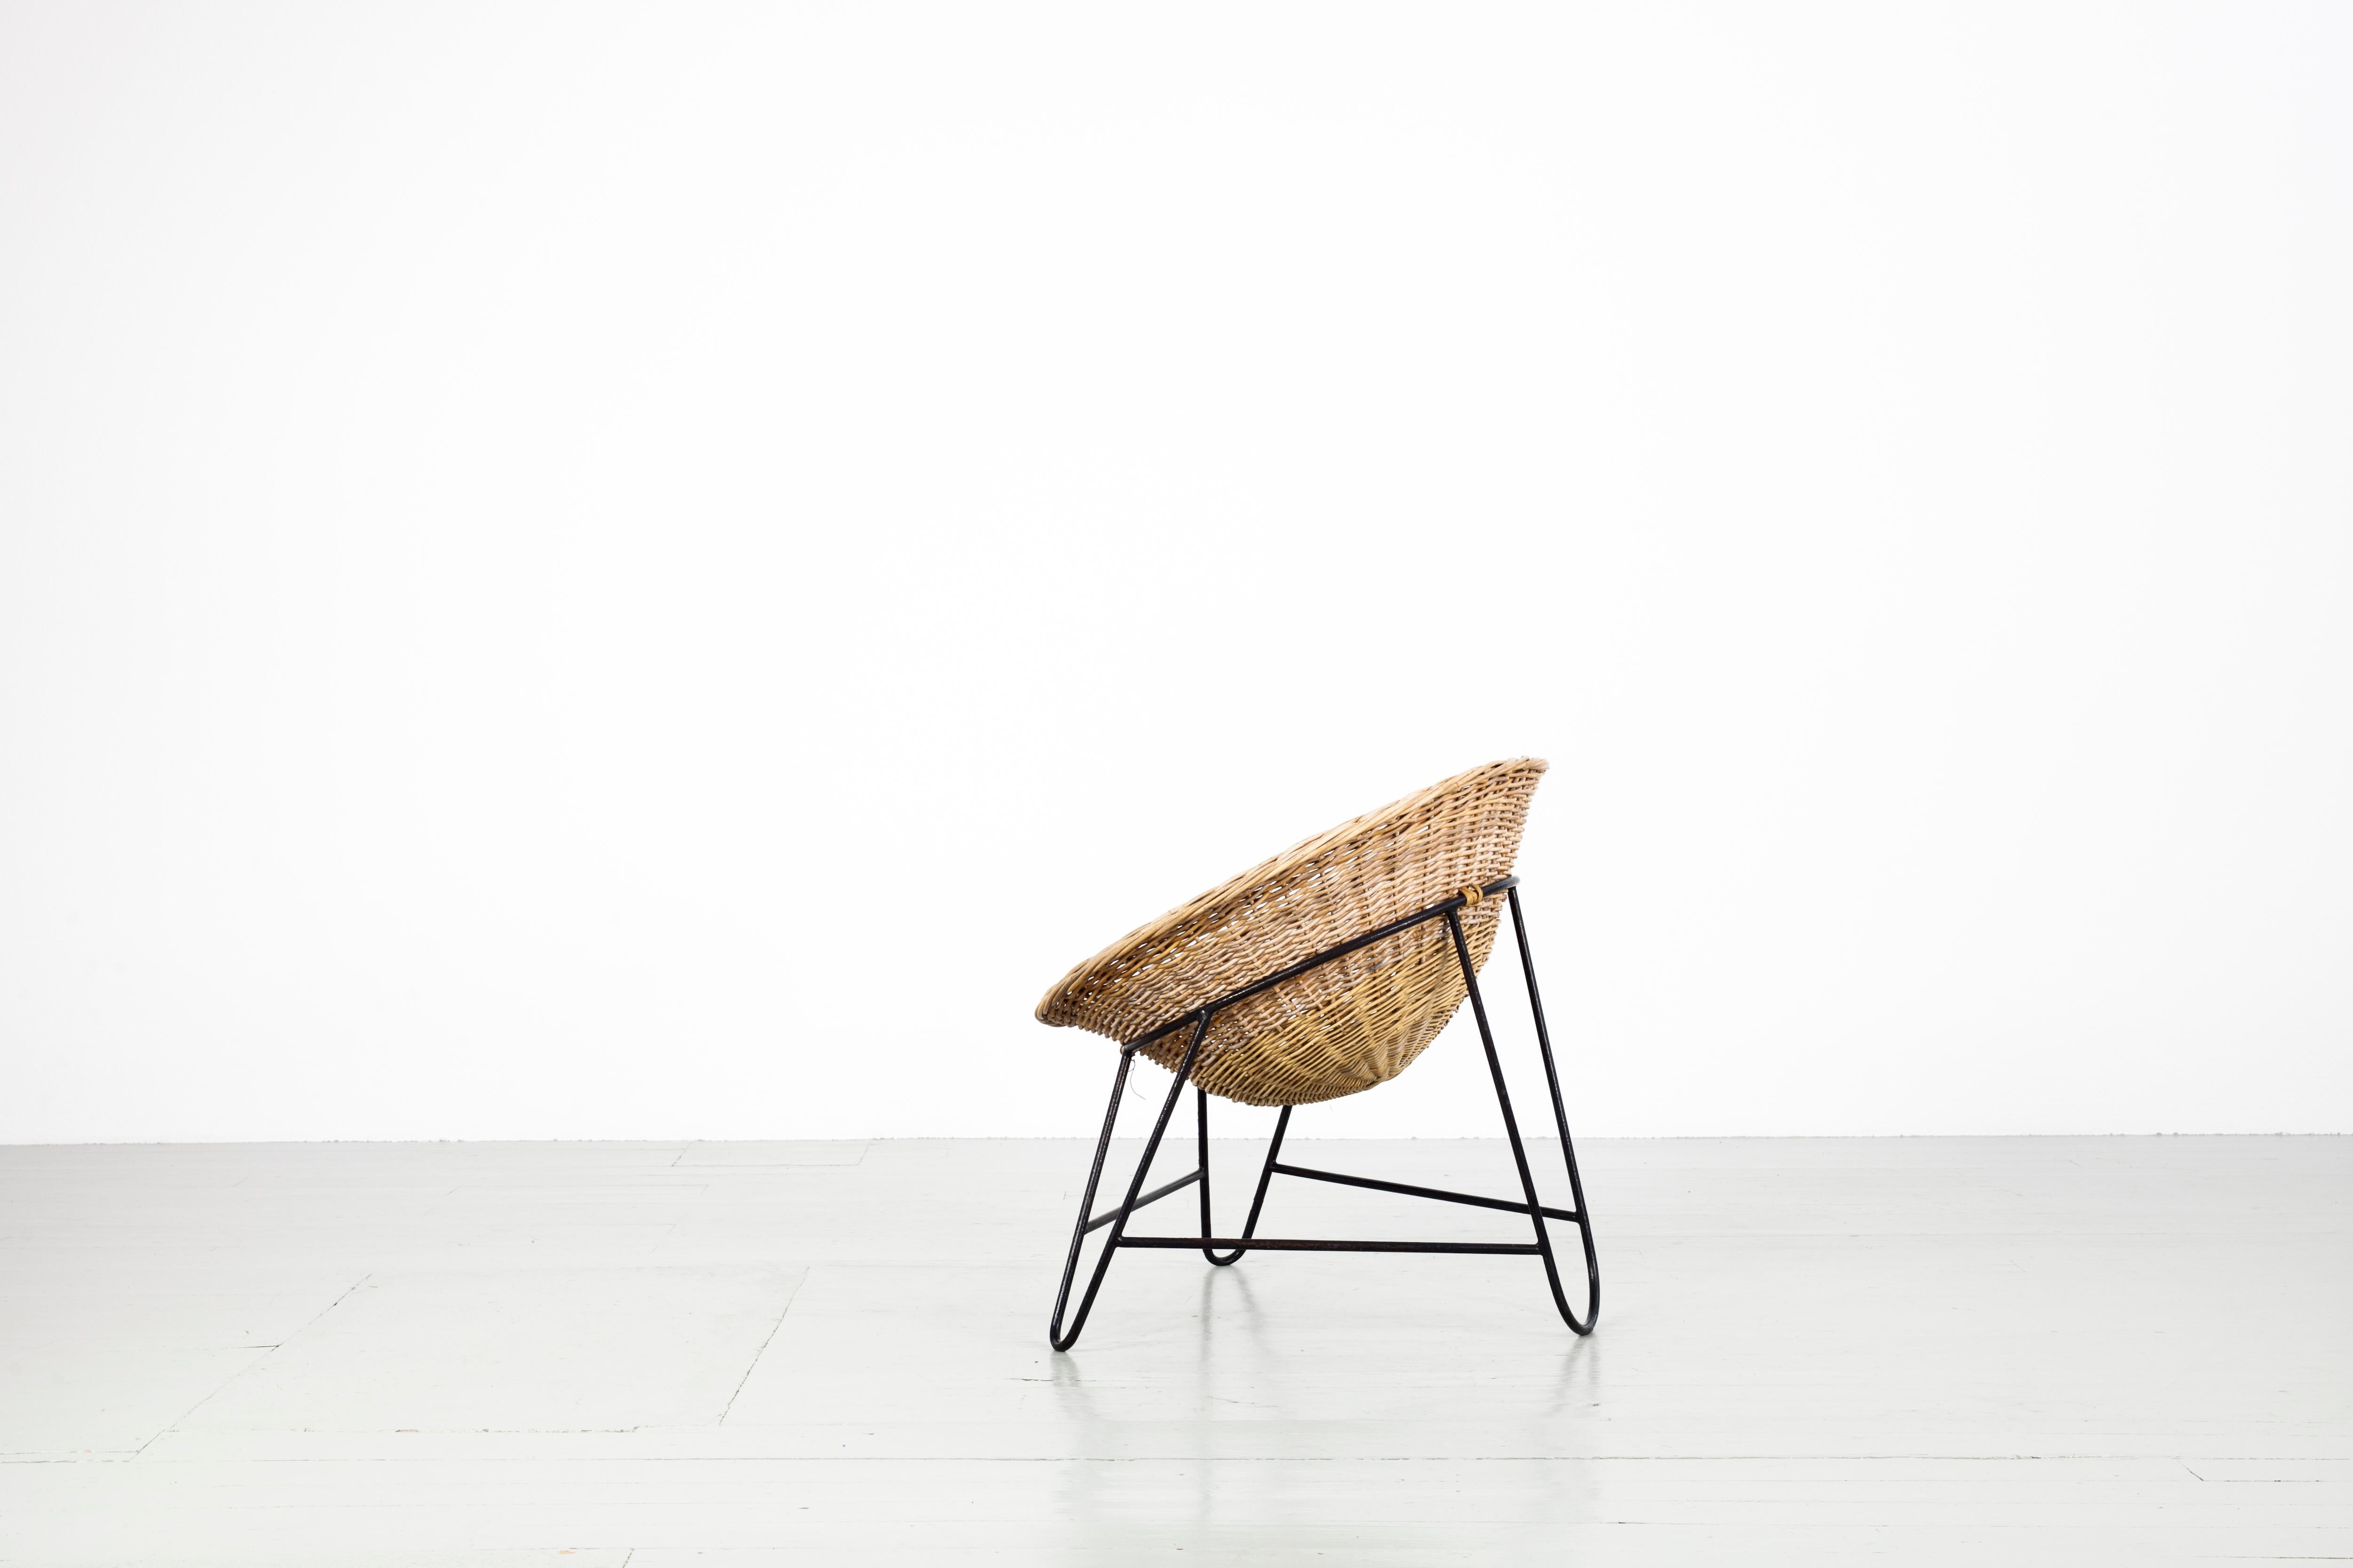 Lacquered Italian Mid-Century Modern light brown coconut-shaped Rattan Basket Chair, 1950 For Sale